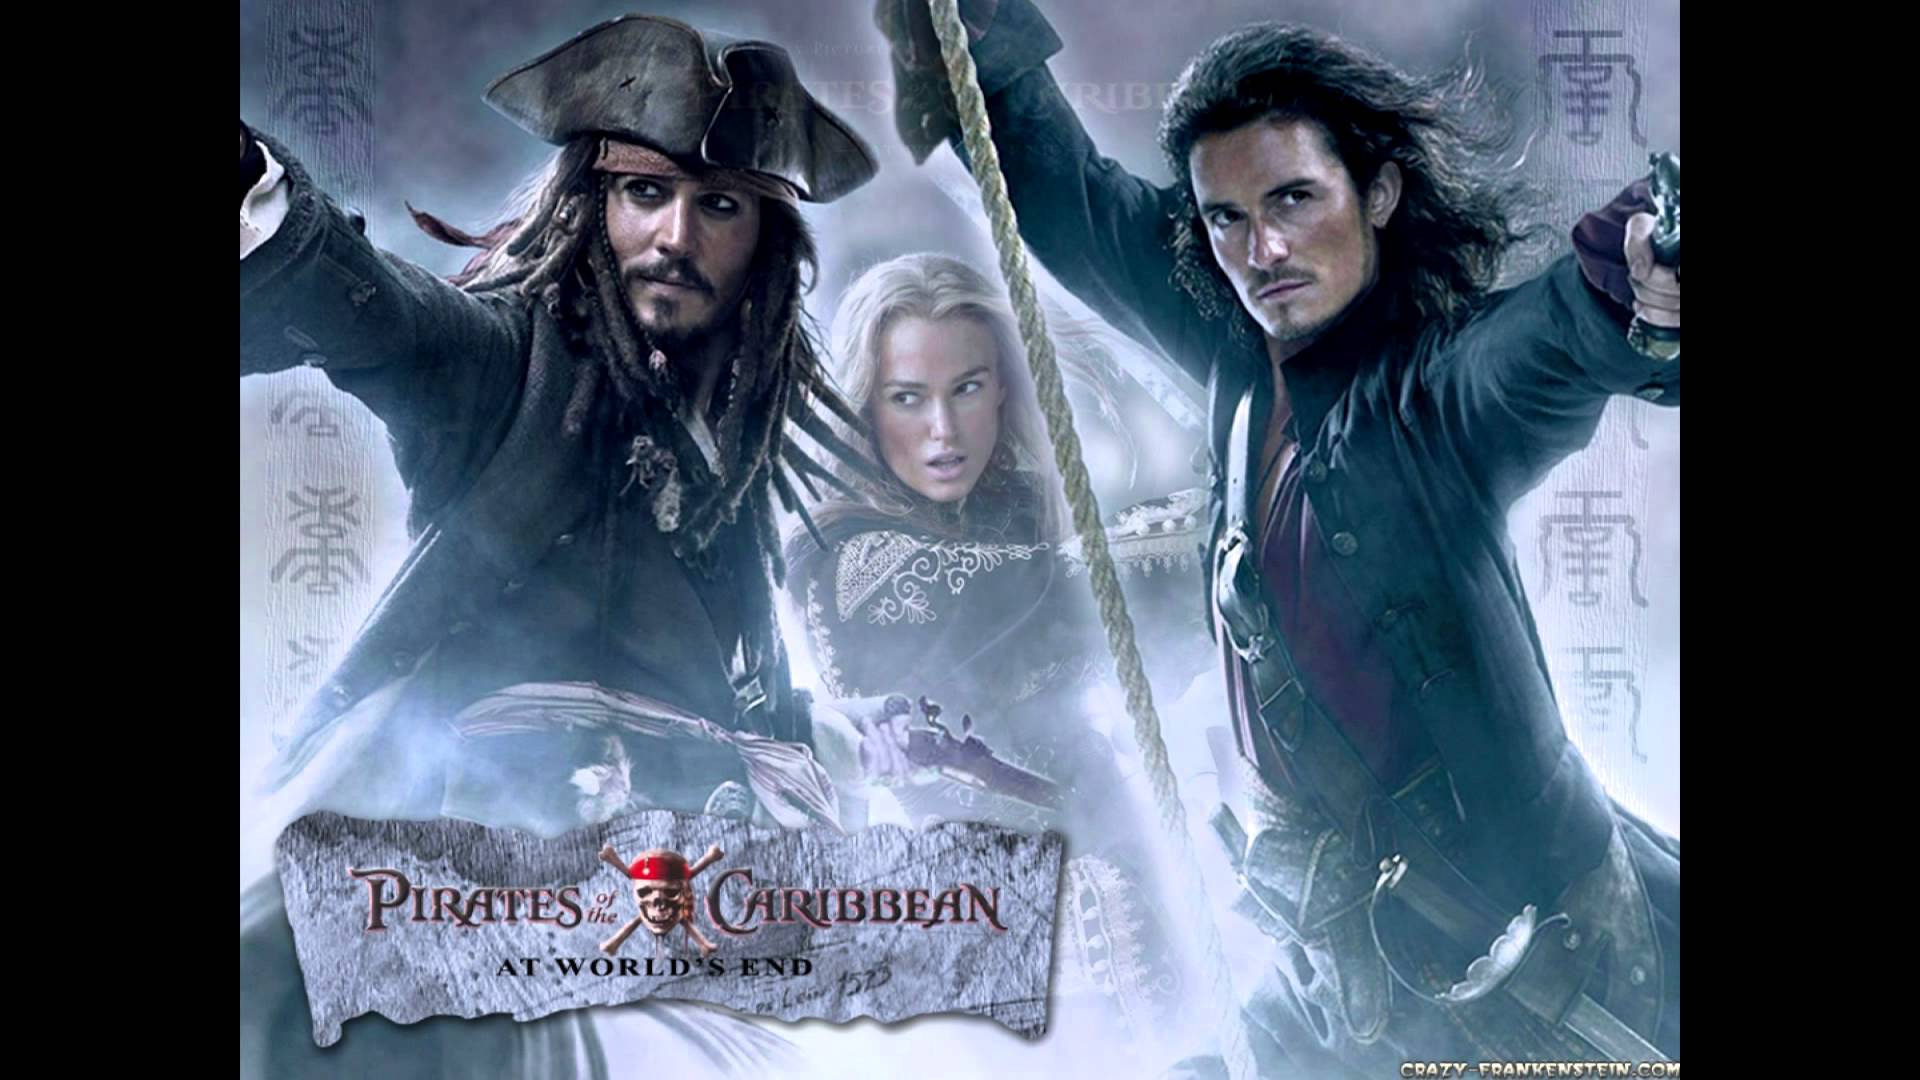 Pirates Of The Caribbean: At World's End #2